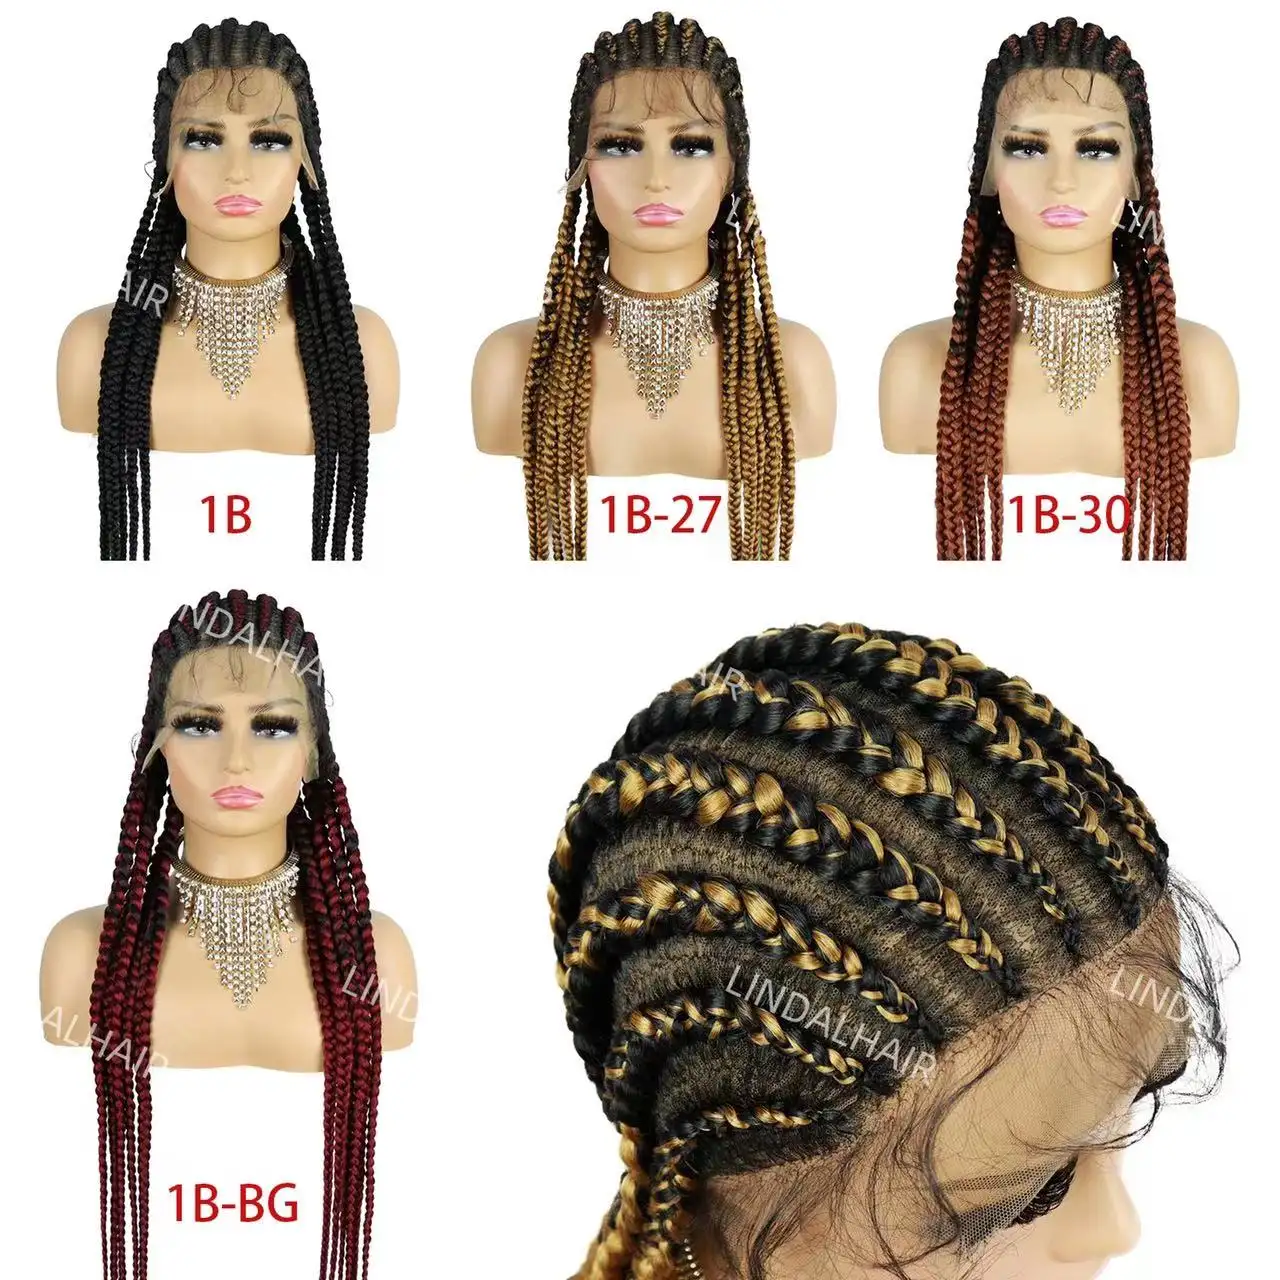 LINDALHAIR butterfly loc braids twist synthetic braiding full lace braid wig vendors for african women